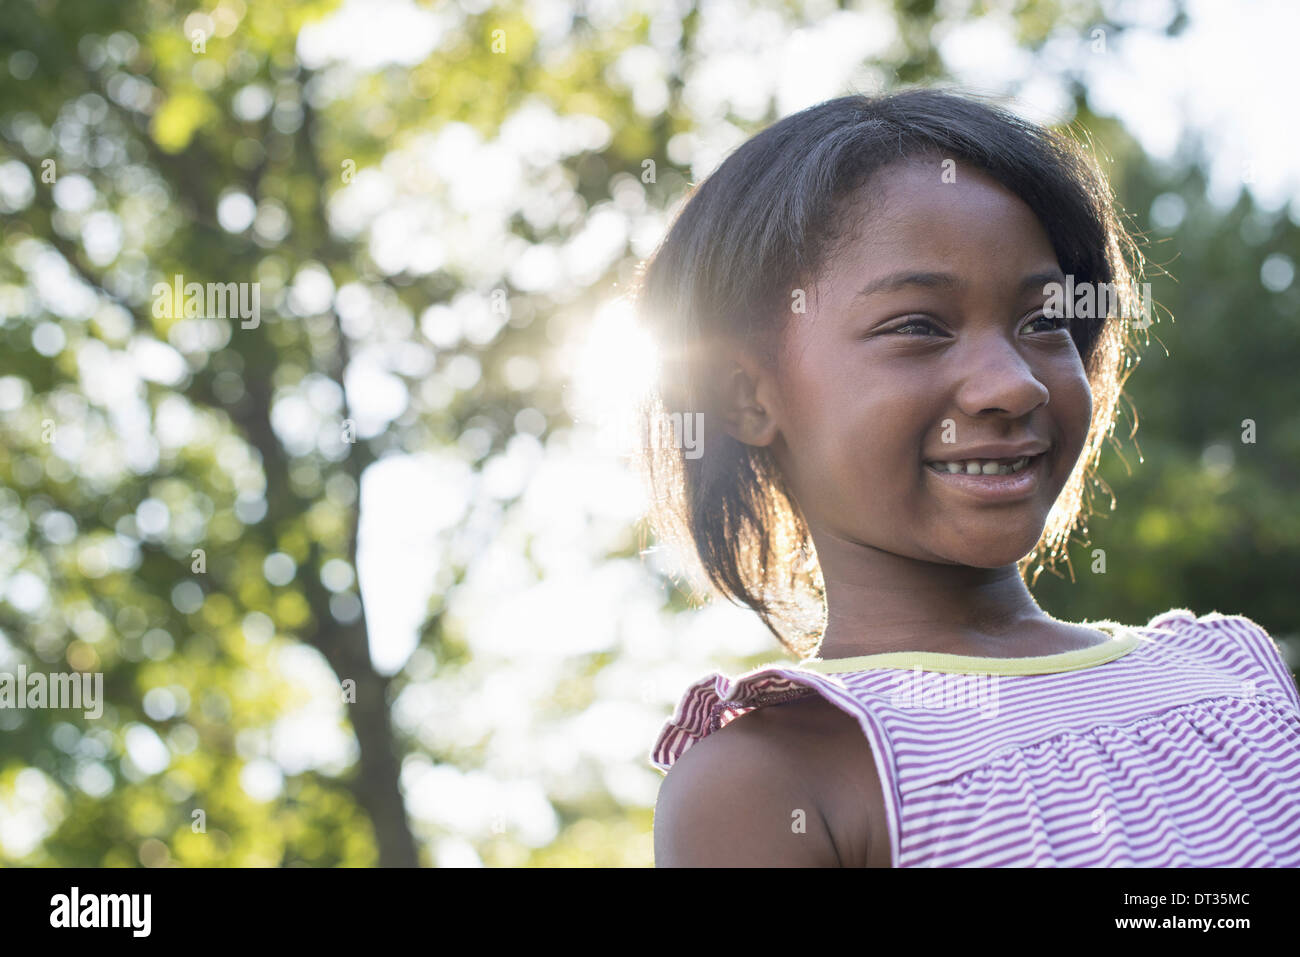 A young girl with short hair in a striped sundress smiling Stock Photo